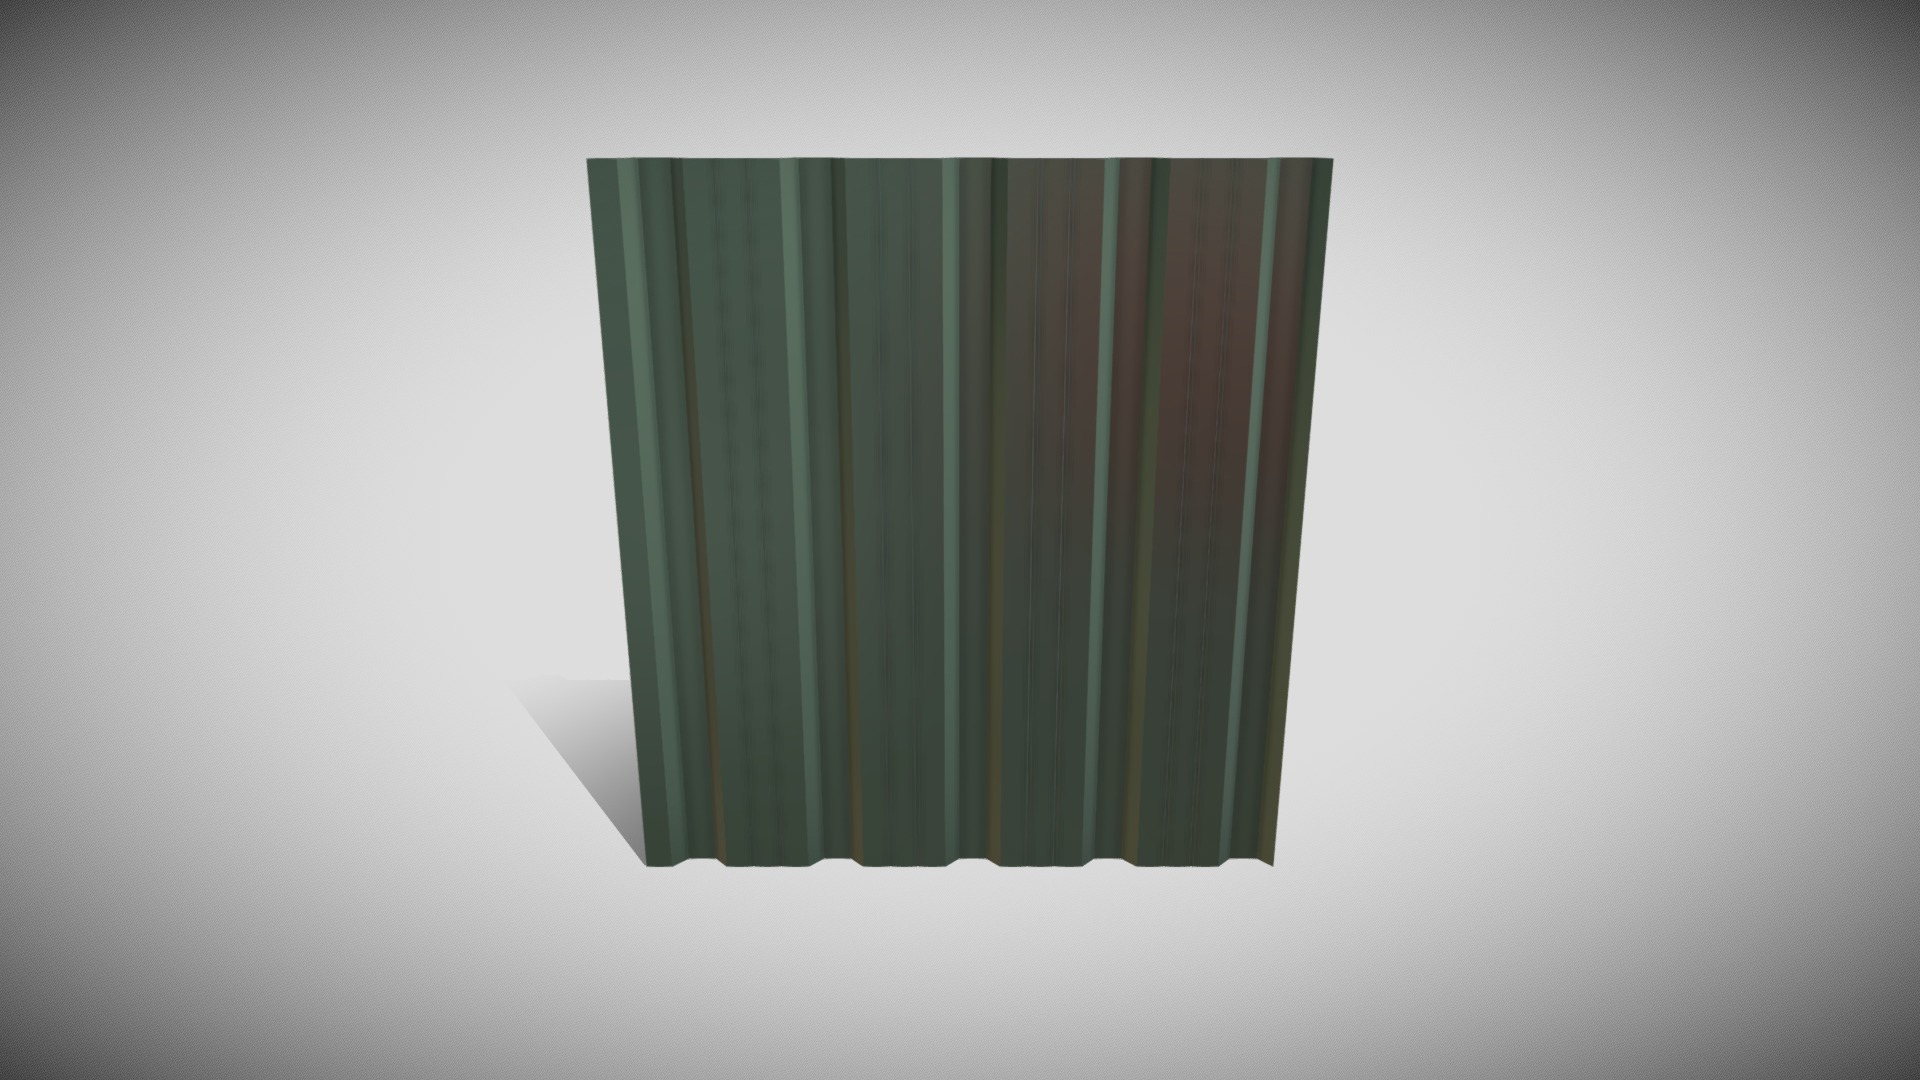 3D model Warehouse Cladding - This is a 3D model of the Warehouse Cladding. The 3D model is about a green square object.